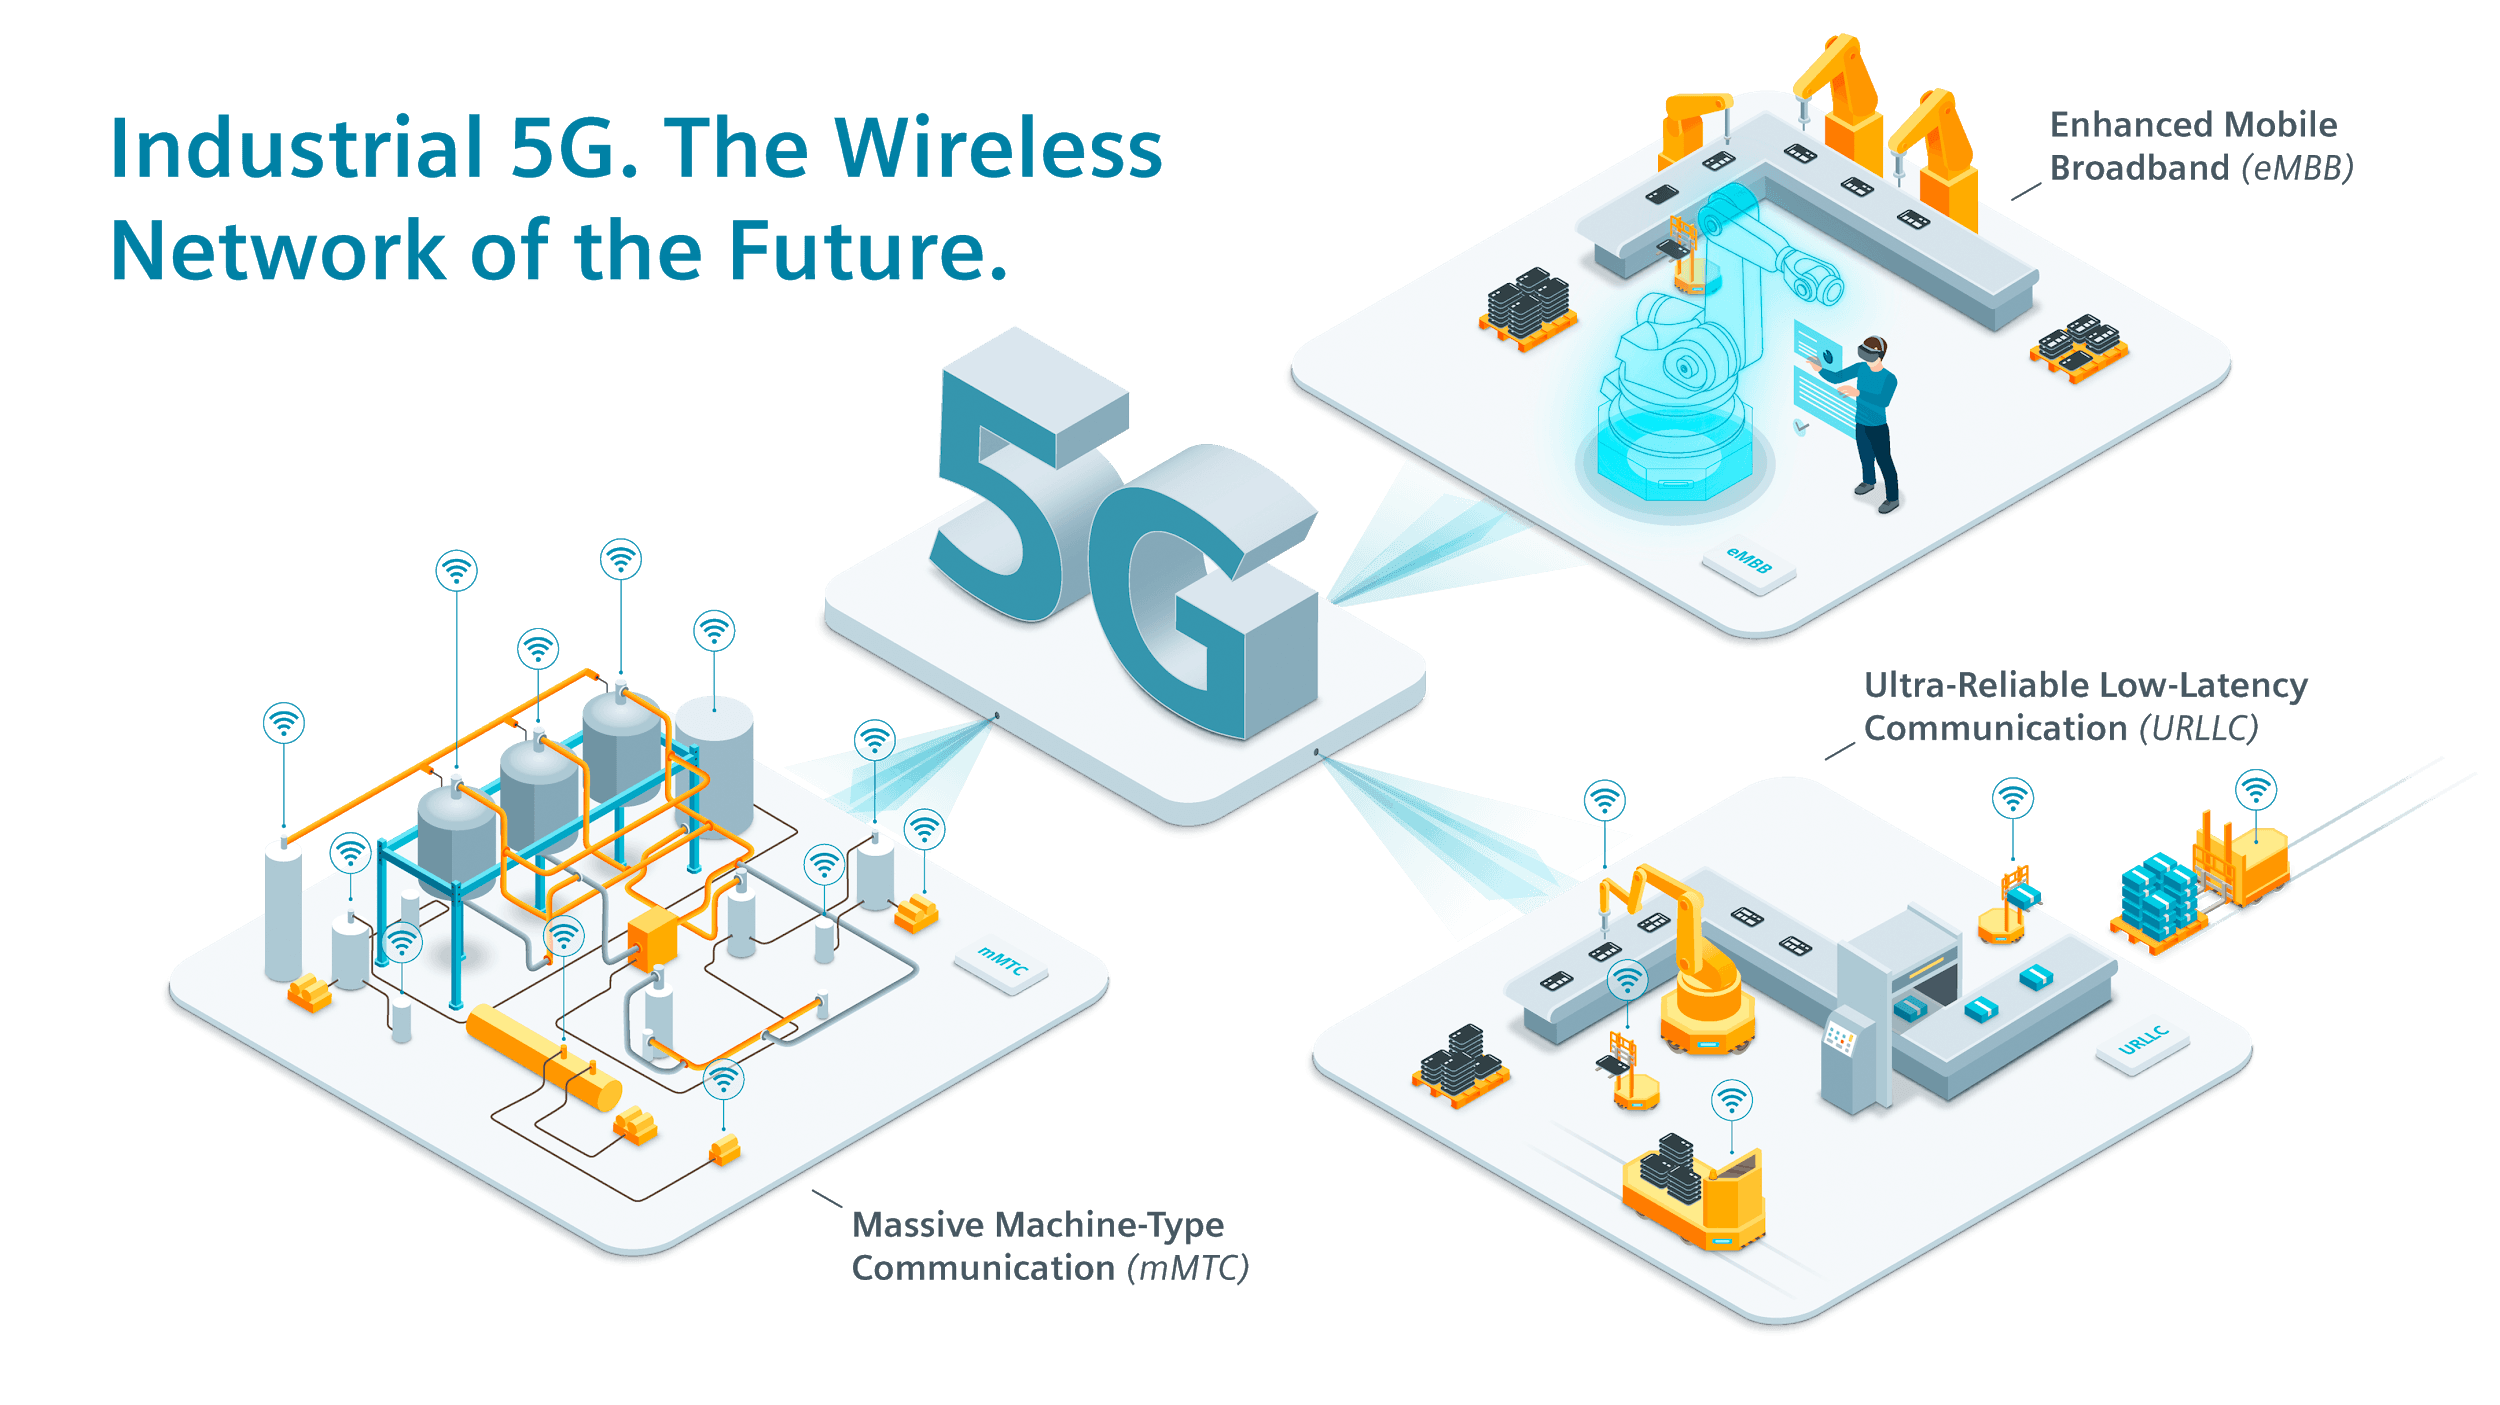 Beyond the Razzle-Dazzle: 5G in Industrial Automation